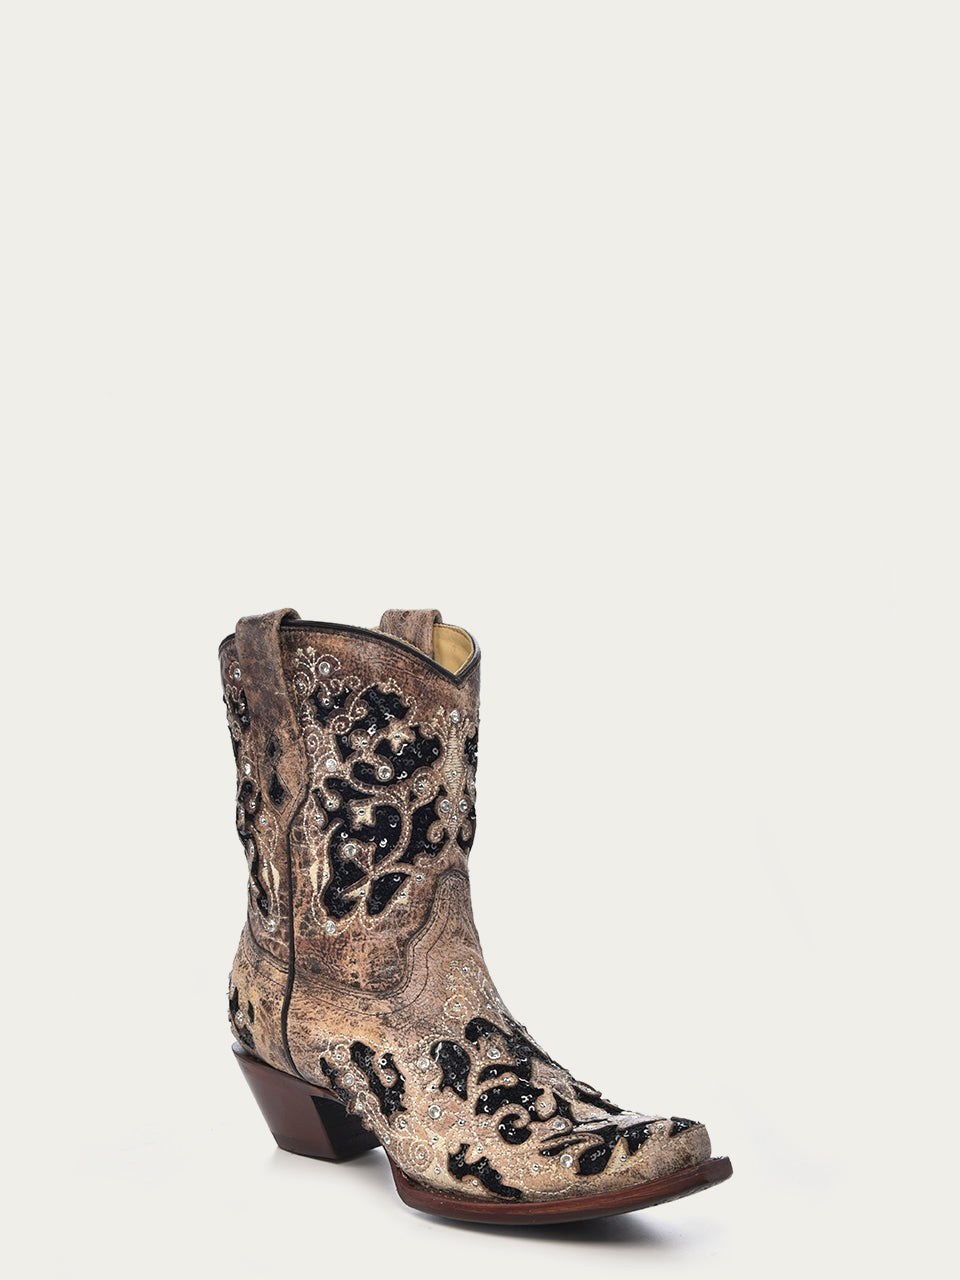 GLITTERED DELICATE FLORAL VINE ANKLE BOOT womens boots 